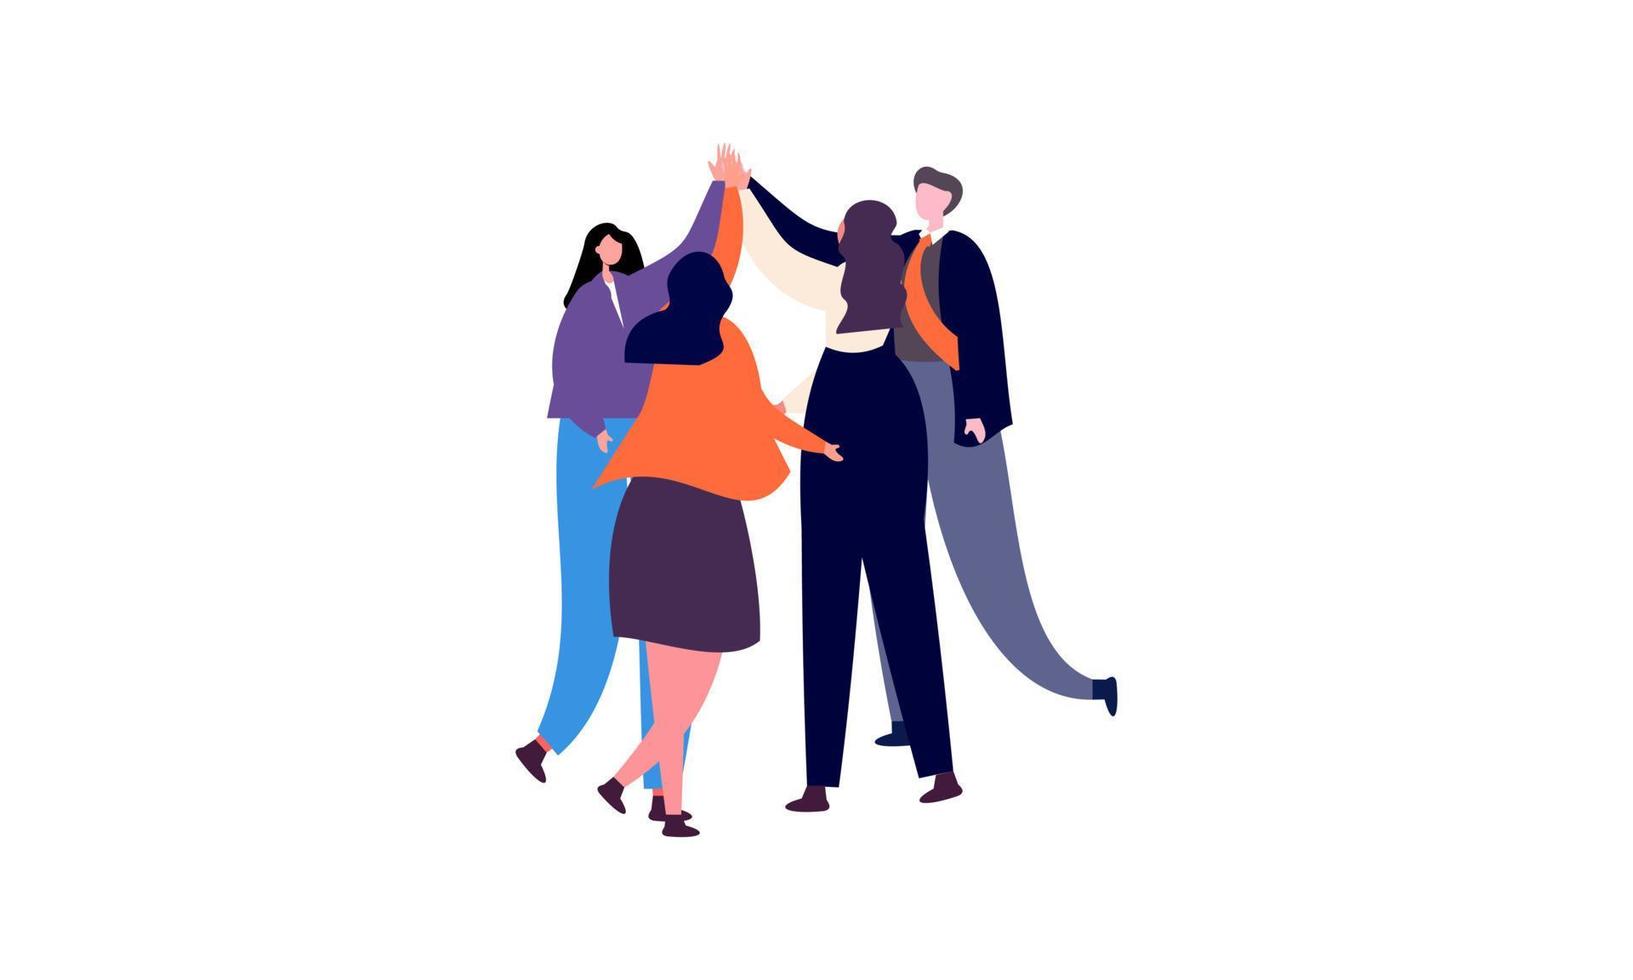 Team of business people celebrate success in work collaboration together, giving high five with joy vector